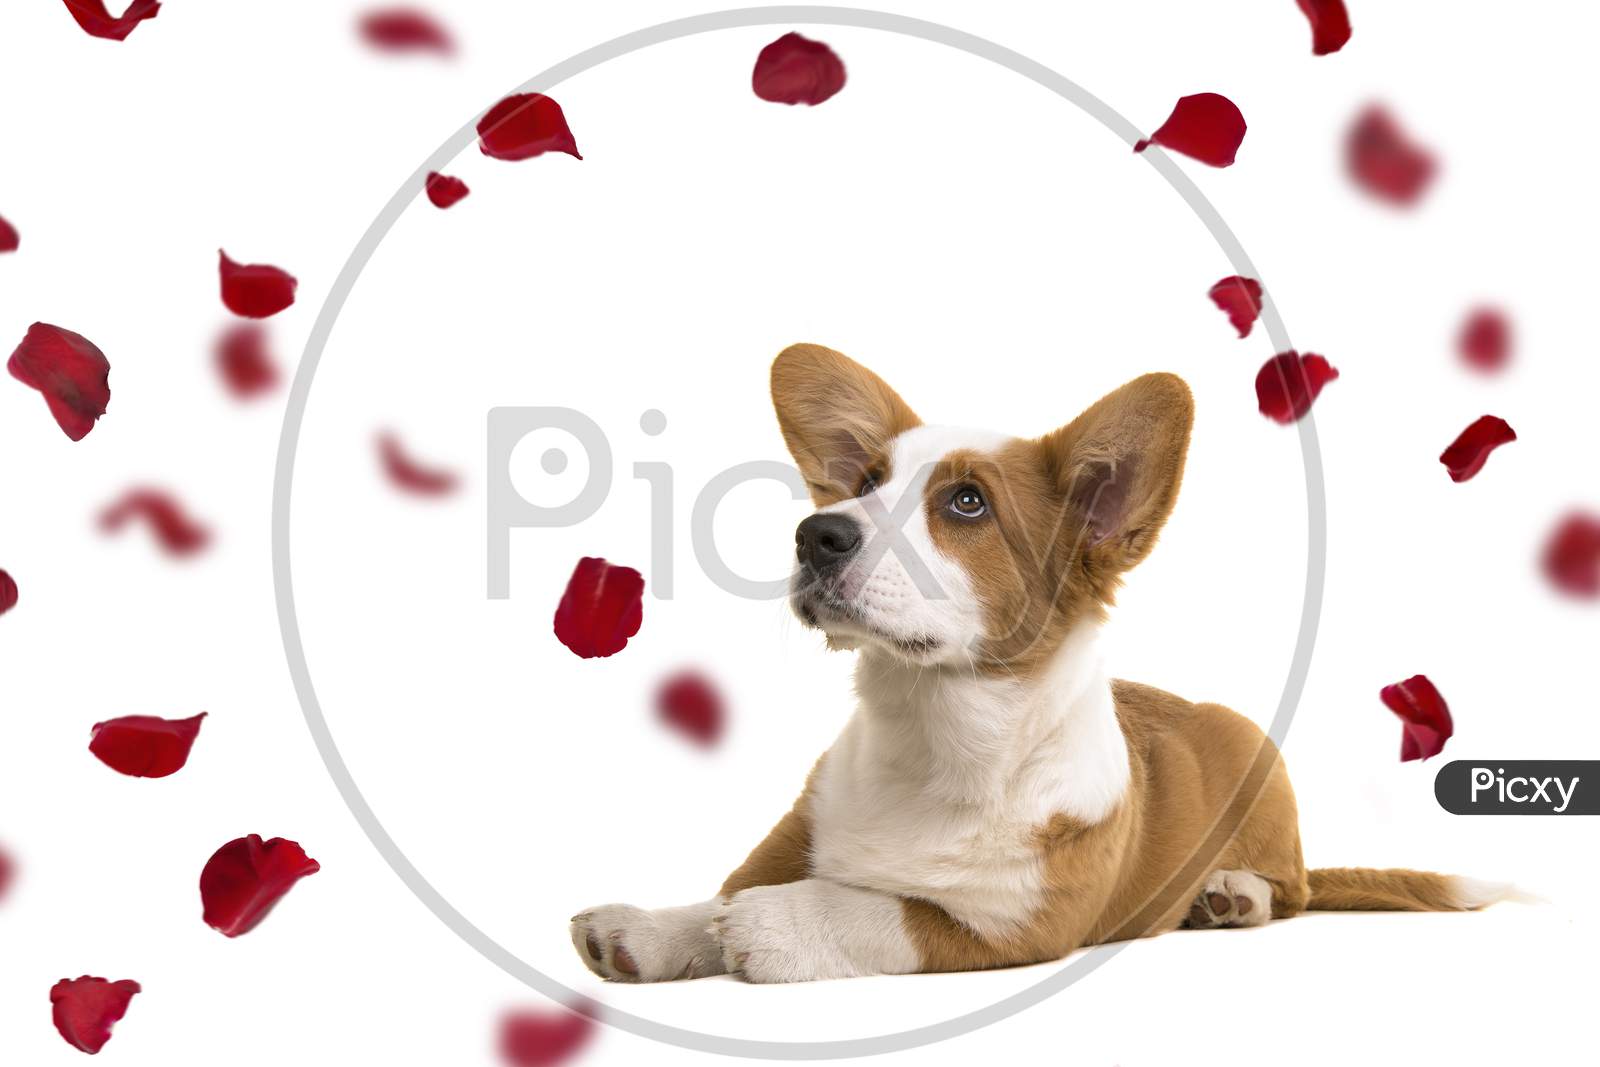 Welsh Corgi Puppy Dog Lying Down On The Floor Looking Up At Falling Red Rose Petals Isolated On A White Background